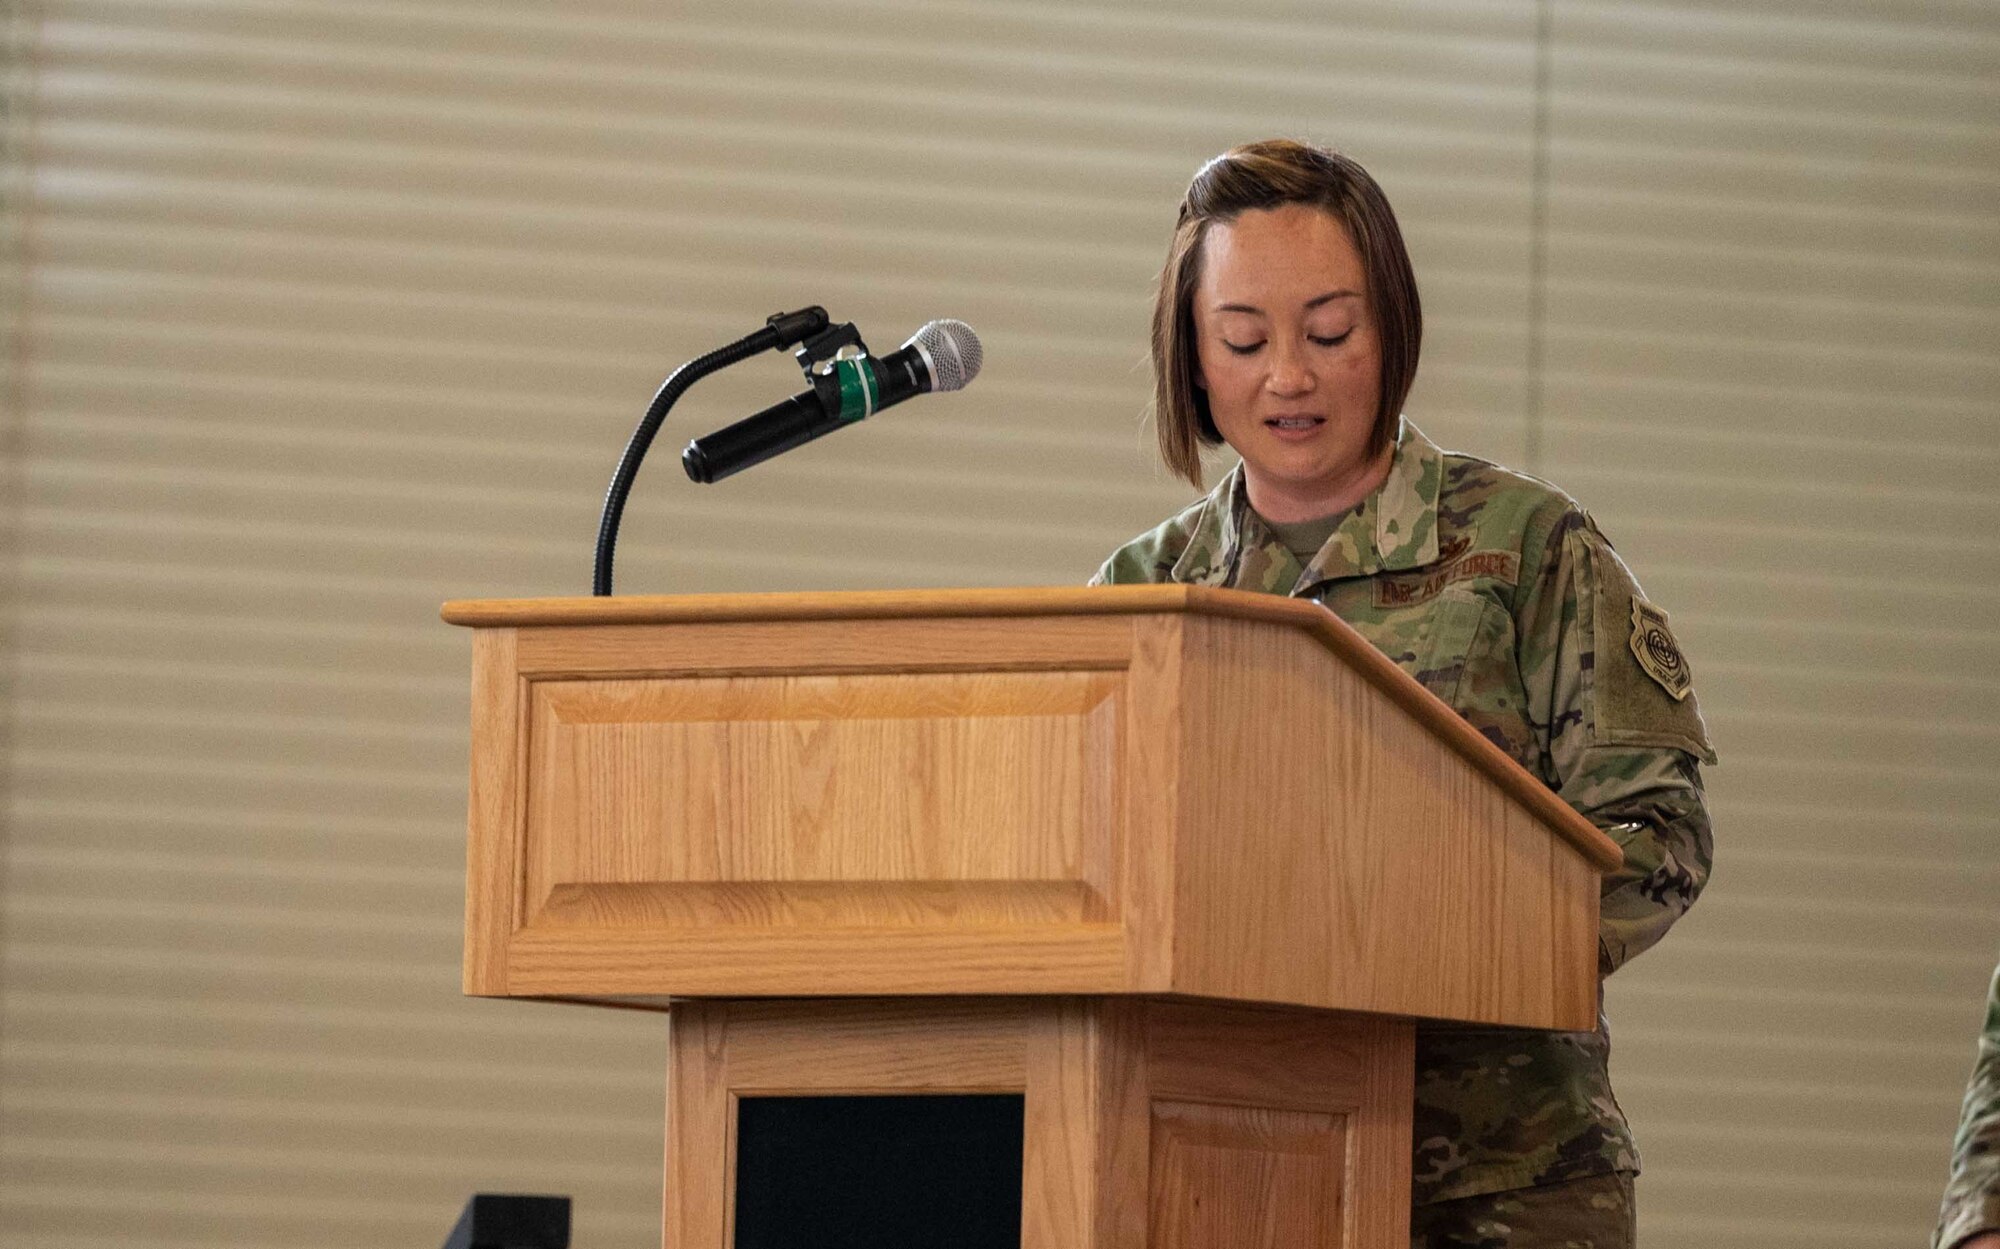 Lt. Col. Josephine Beacham, 436th Aircraft Maintenance Squadron commander, speaks at the 436th AMXS change of command on Dover Air Force Base, Delaware, May 7, 2021. During the ceremony, Beacham took command from Lt. Col. Jason Purcell. The squadron is responsible for the inspection, repair, launch and recovery of Dover AFB’s C-5M Super Galaxy fleet. (U.S. Air Force photo by Airman 1st Class Faith Schaefer)